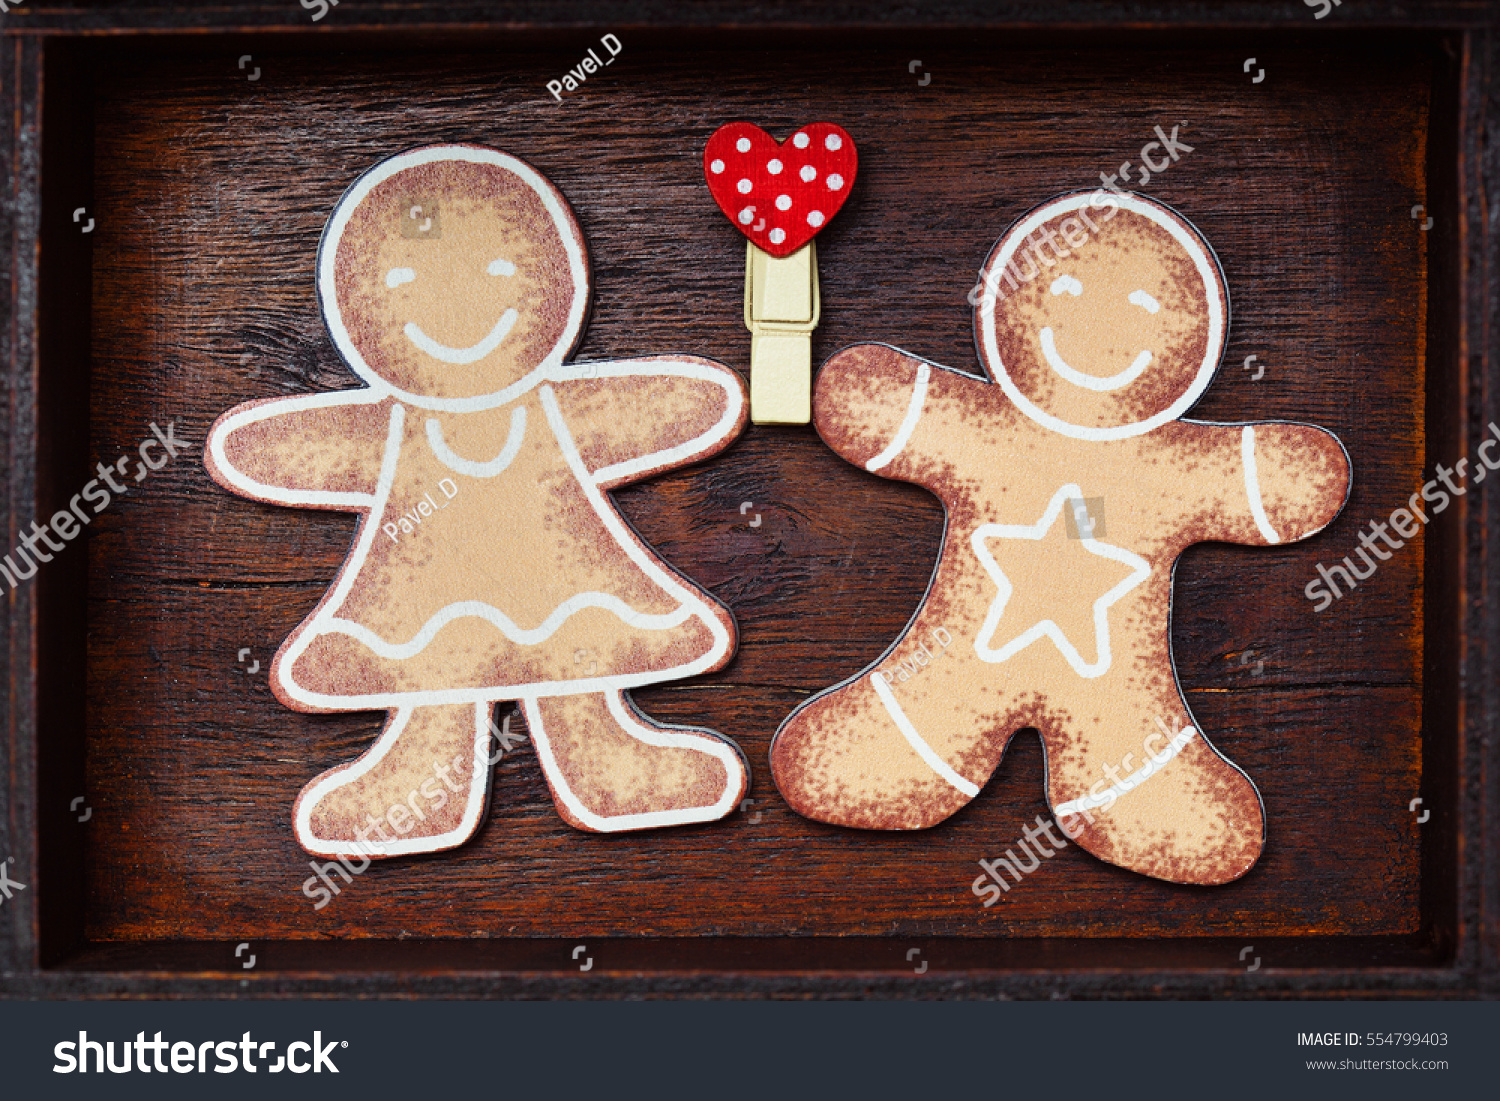 Valentine's Day. Lovers gingerbread men holding red heart (love symbol) on wooden background. #554799403